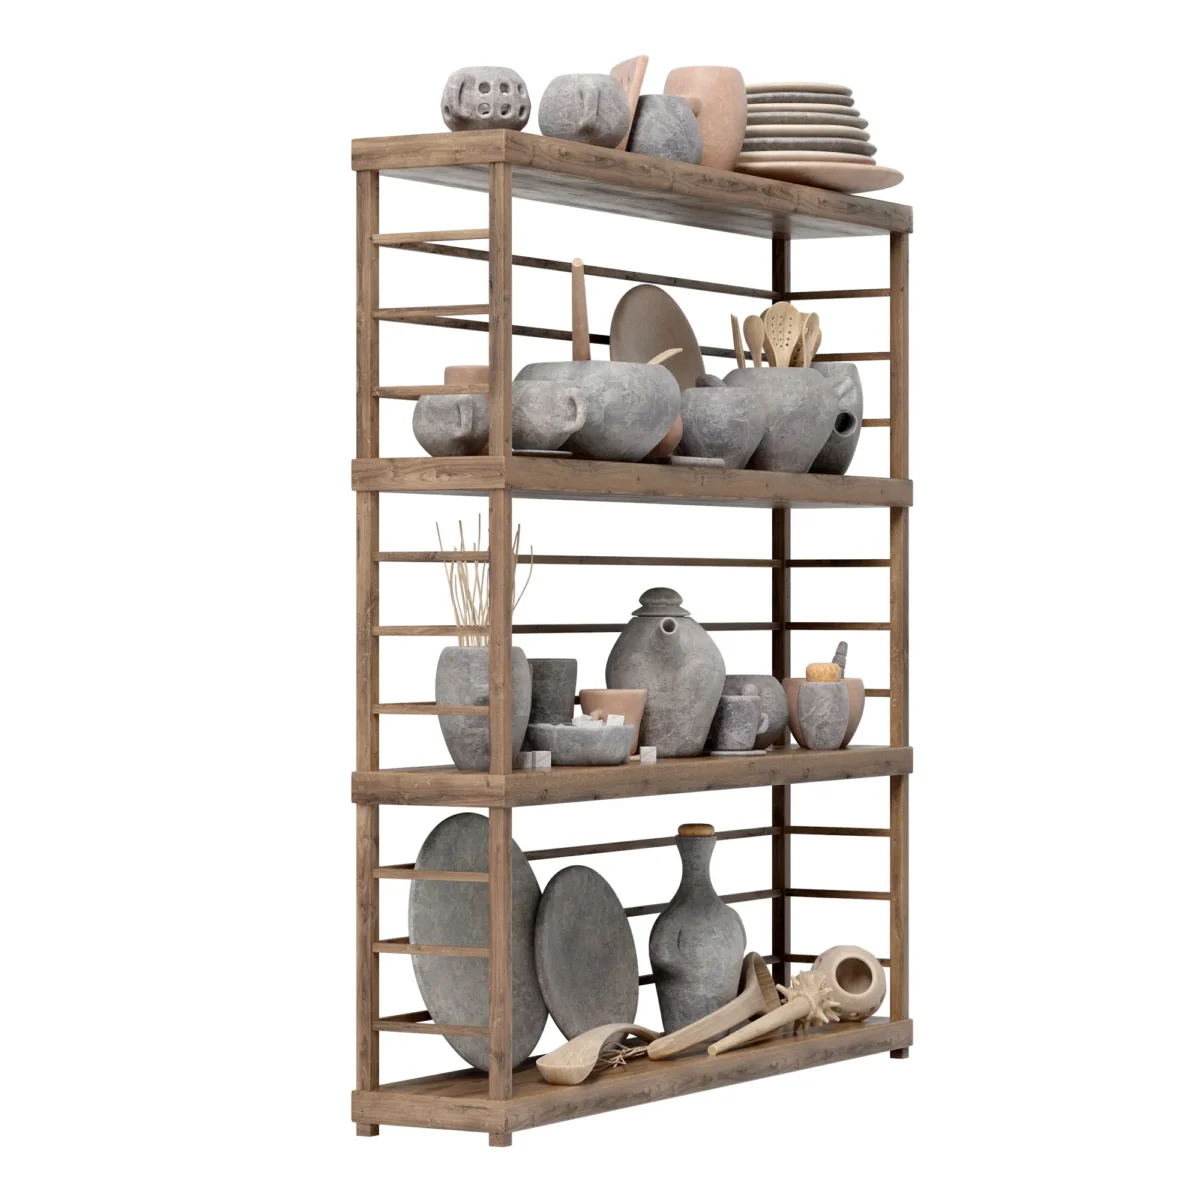 Dishes clay rack N4 3D model download on cg.market 3ds max ,V-Ray